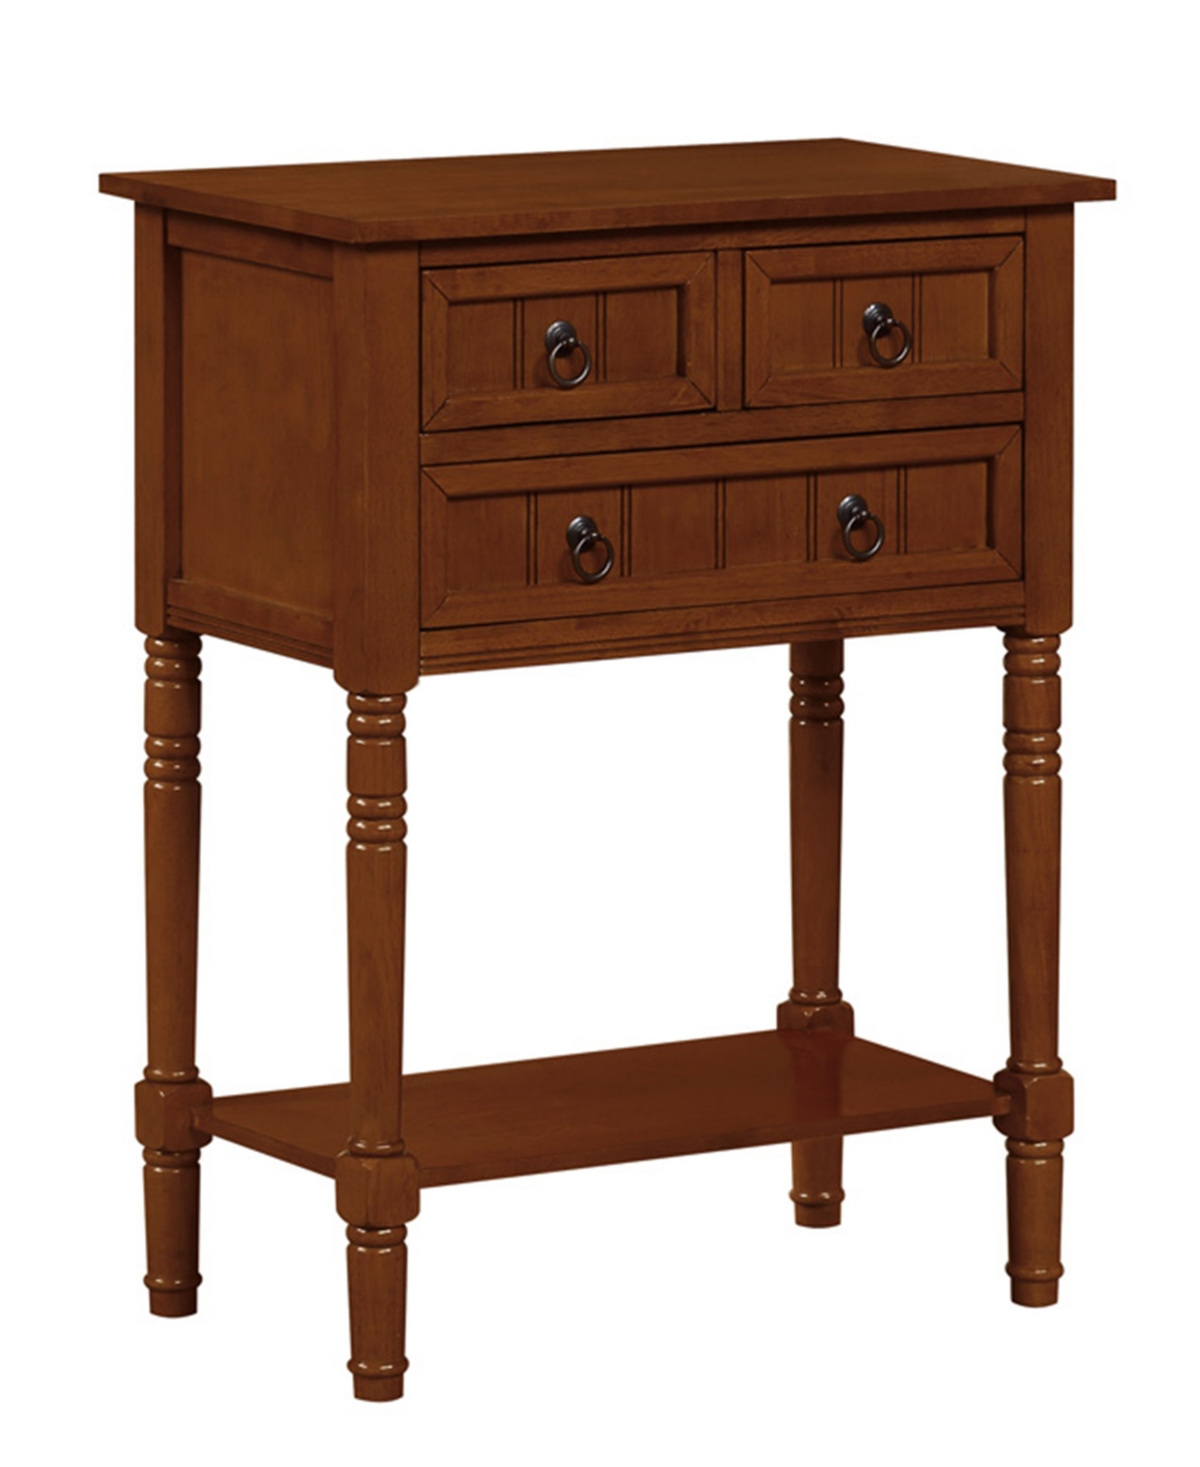 Convenience Concepts 23.75" Mdf Kendra 3 Drawer Hall Table With Shelf In Red